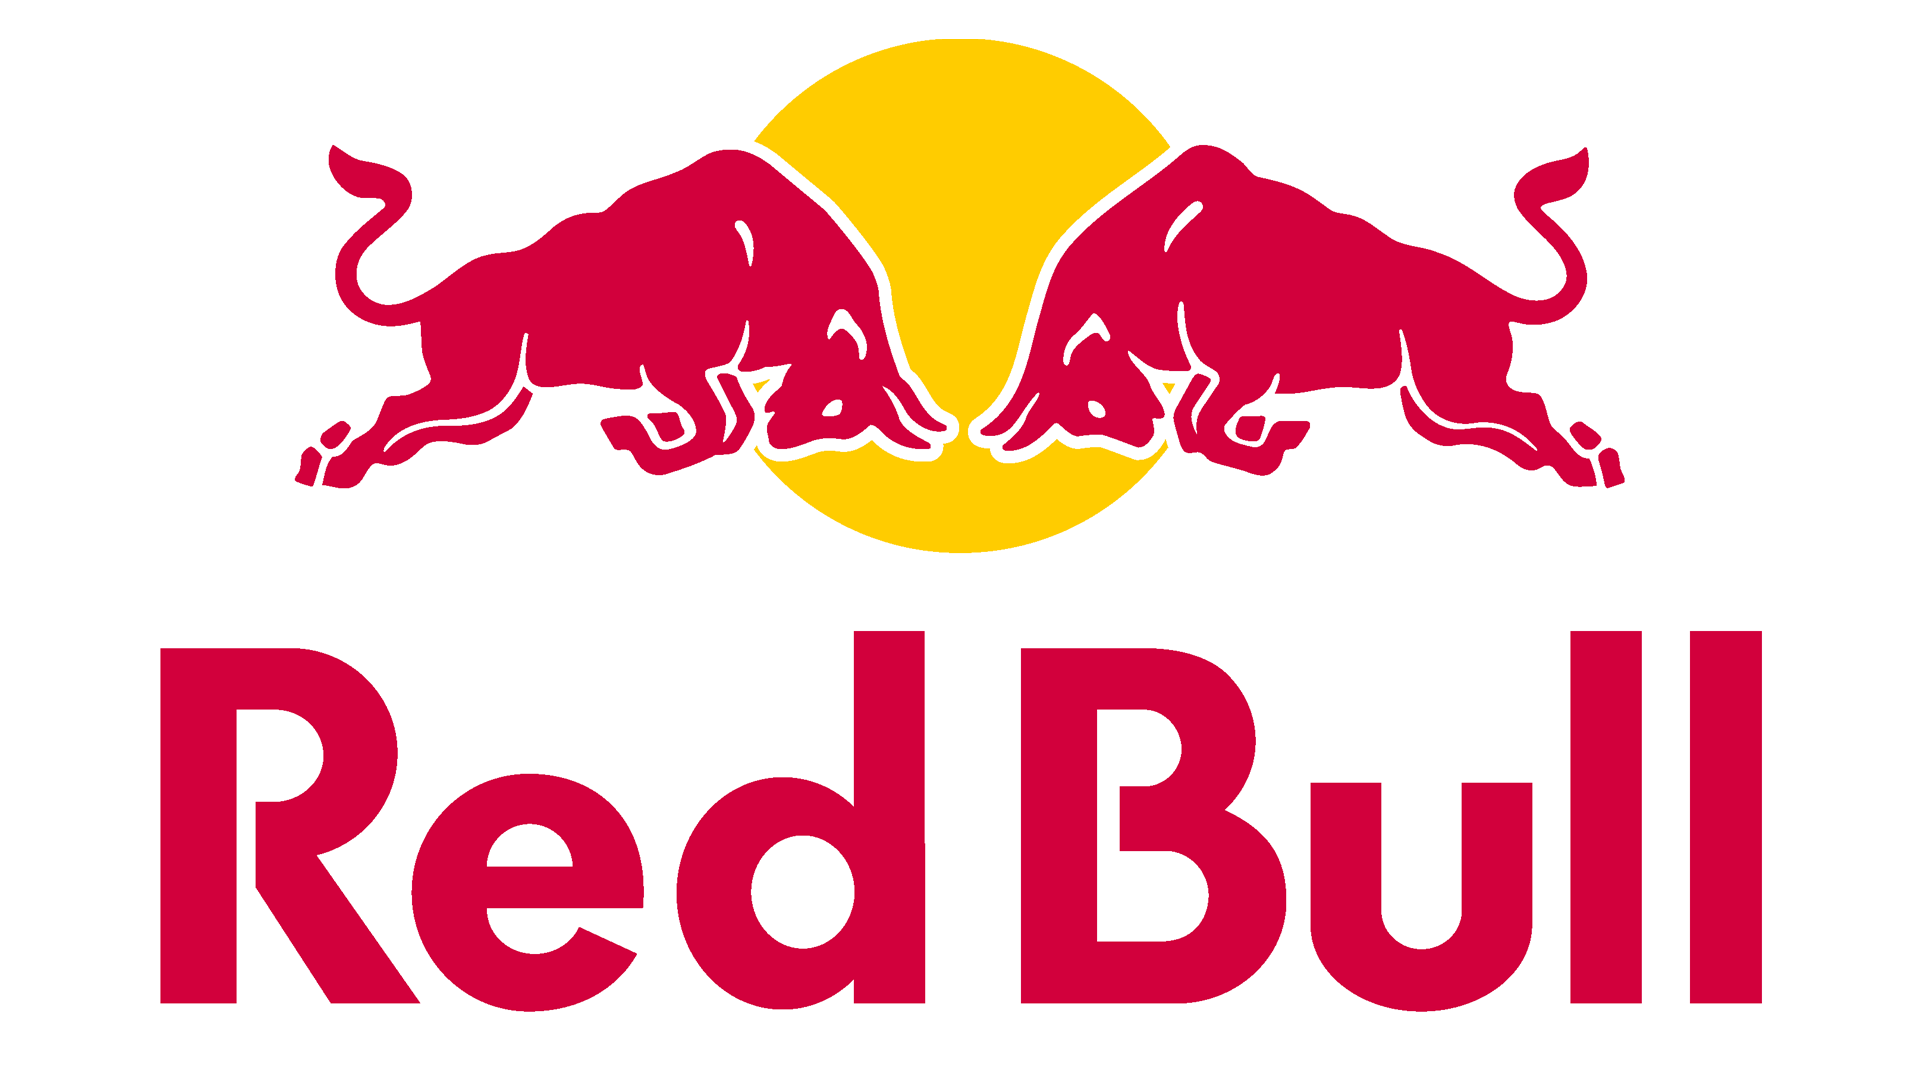 Marque: RED BULL